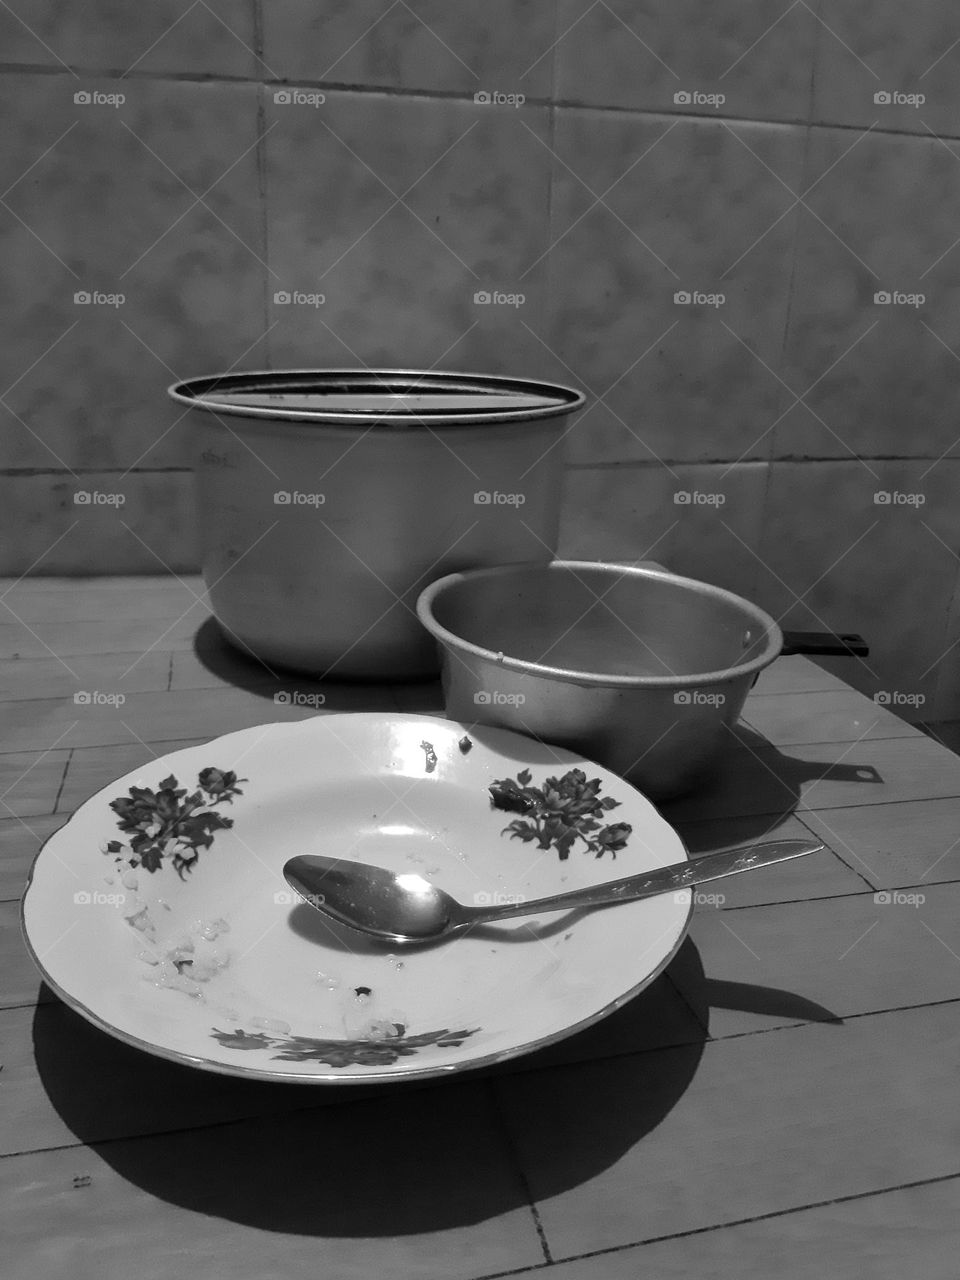 a fine art style of dinner utilities: plate, spoon, and pans on the table